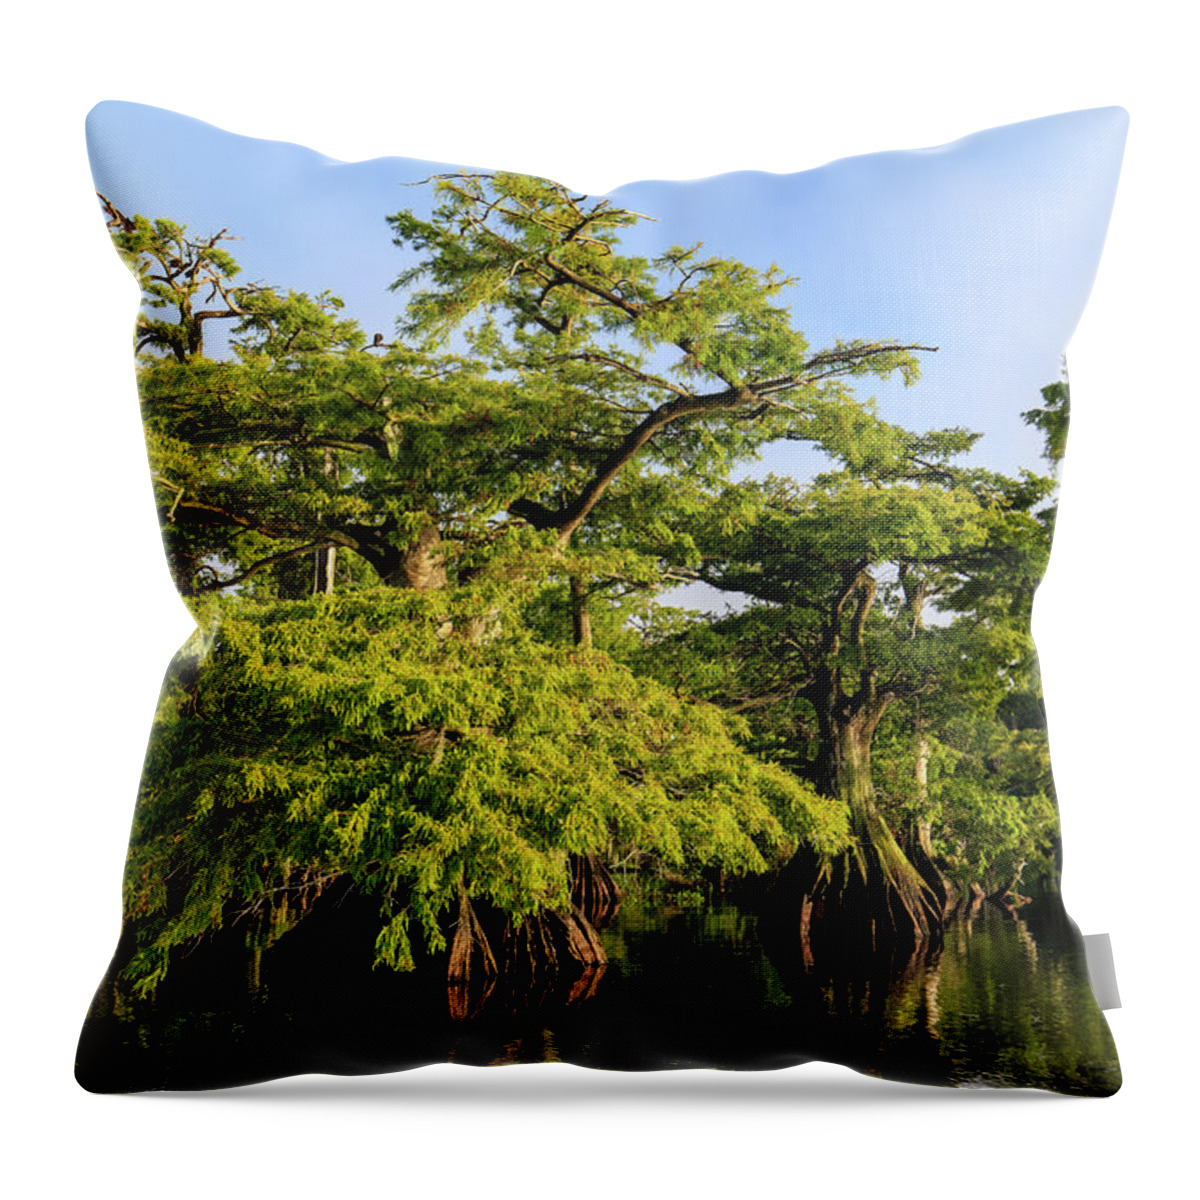 Florida Throw Pillow featuring the photograph Summer Greens by Stefan Mazzola